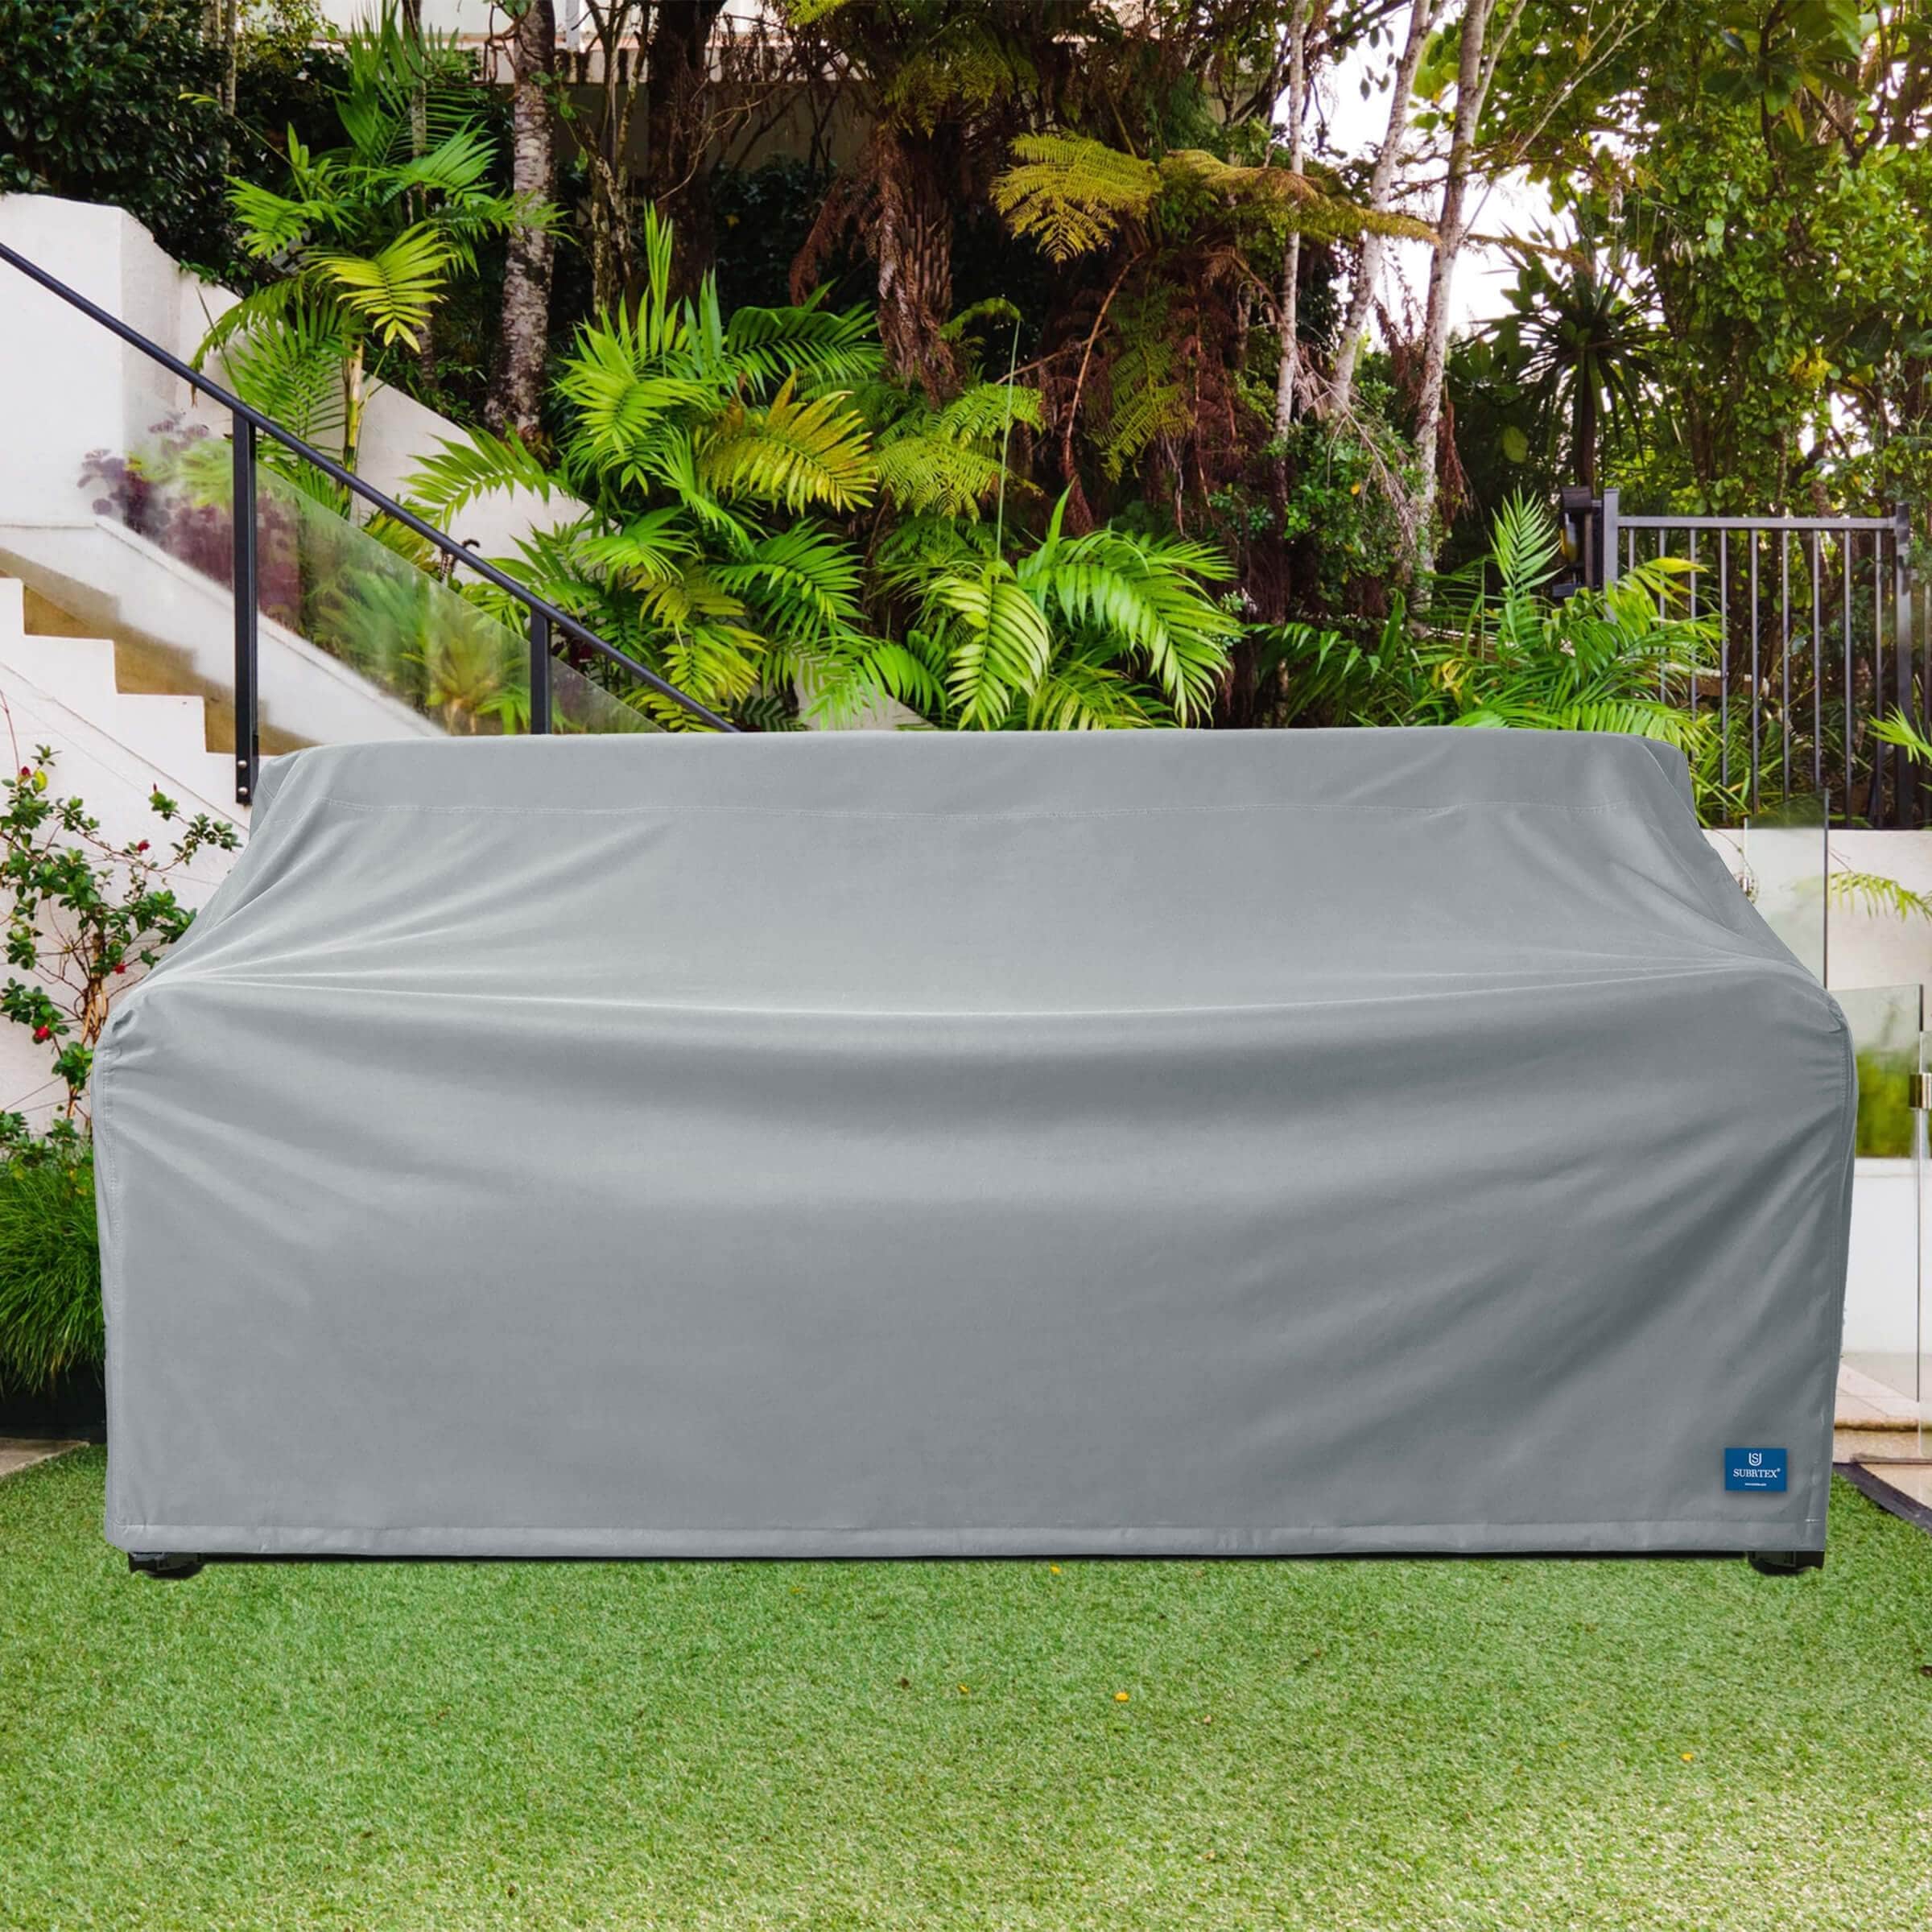 Subrtex Outdoor Sofa Cover Waterproof Couch Cover Patio Furniture Protector  - On Sale - Bed Bath & Beyond - 34553610